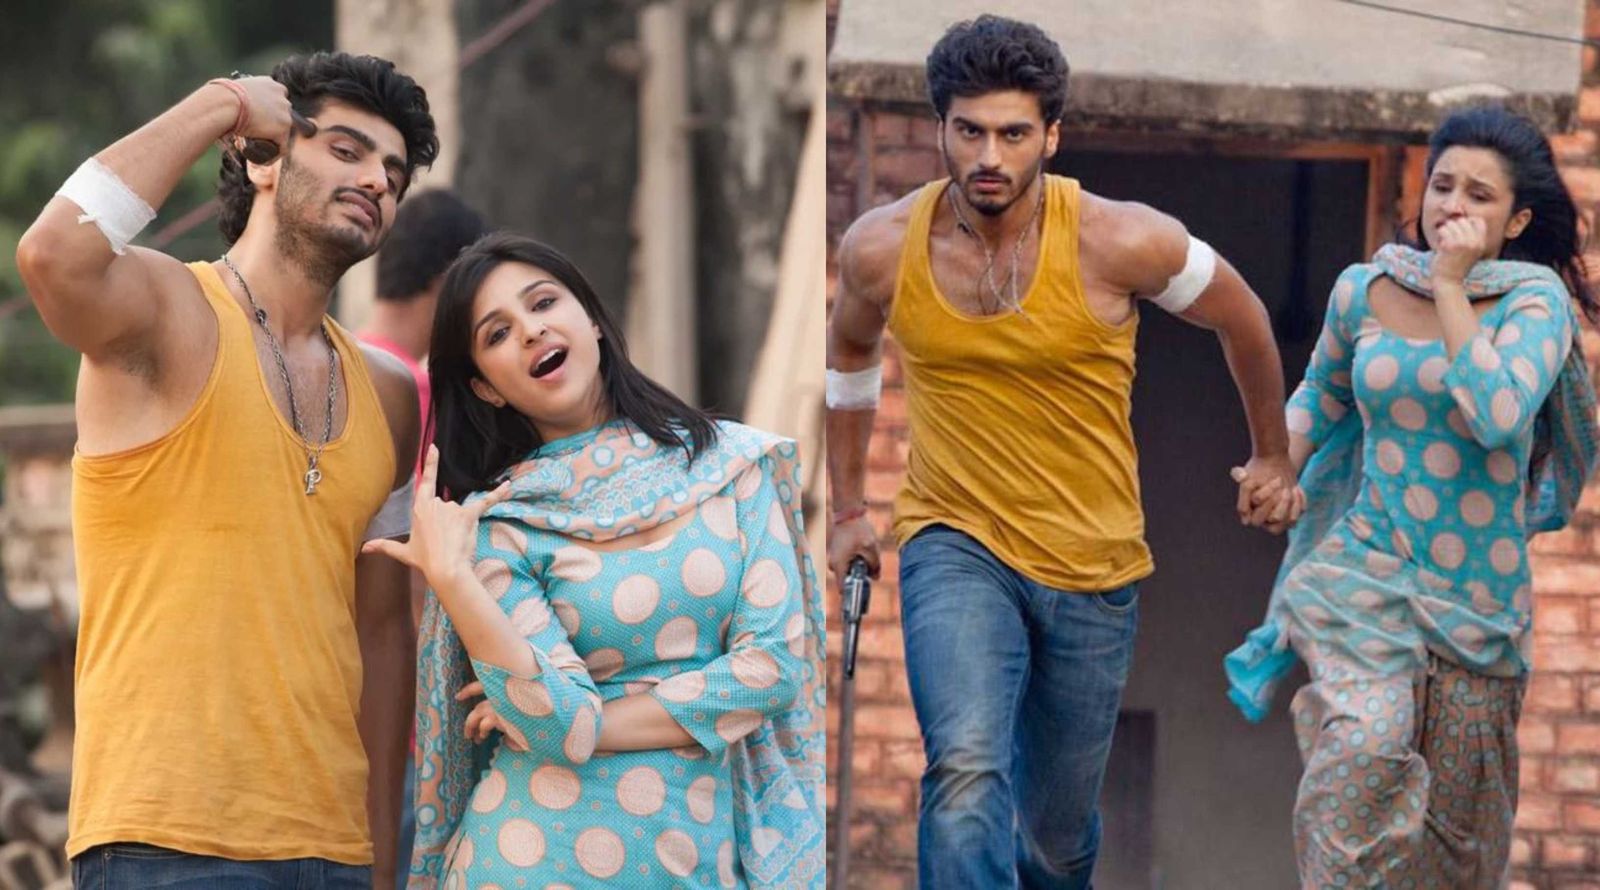 Arjun Kapoor marks 10 years in Bollywood with BTS stills from Ishaqzaade and a note; says the film ‘turbo-charged’ his dream